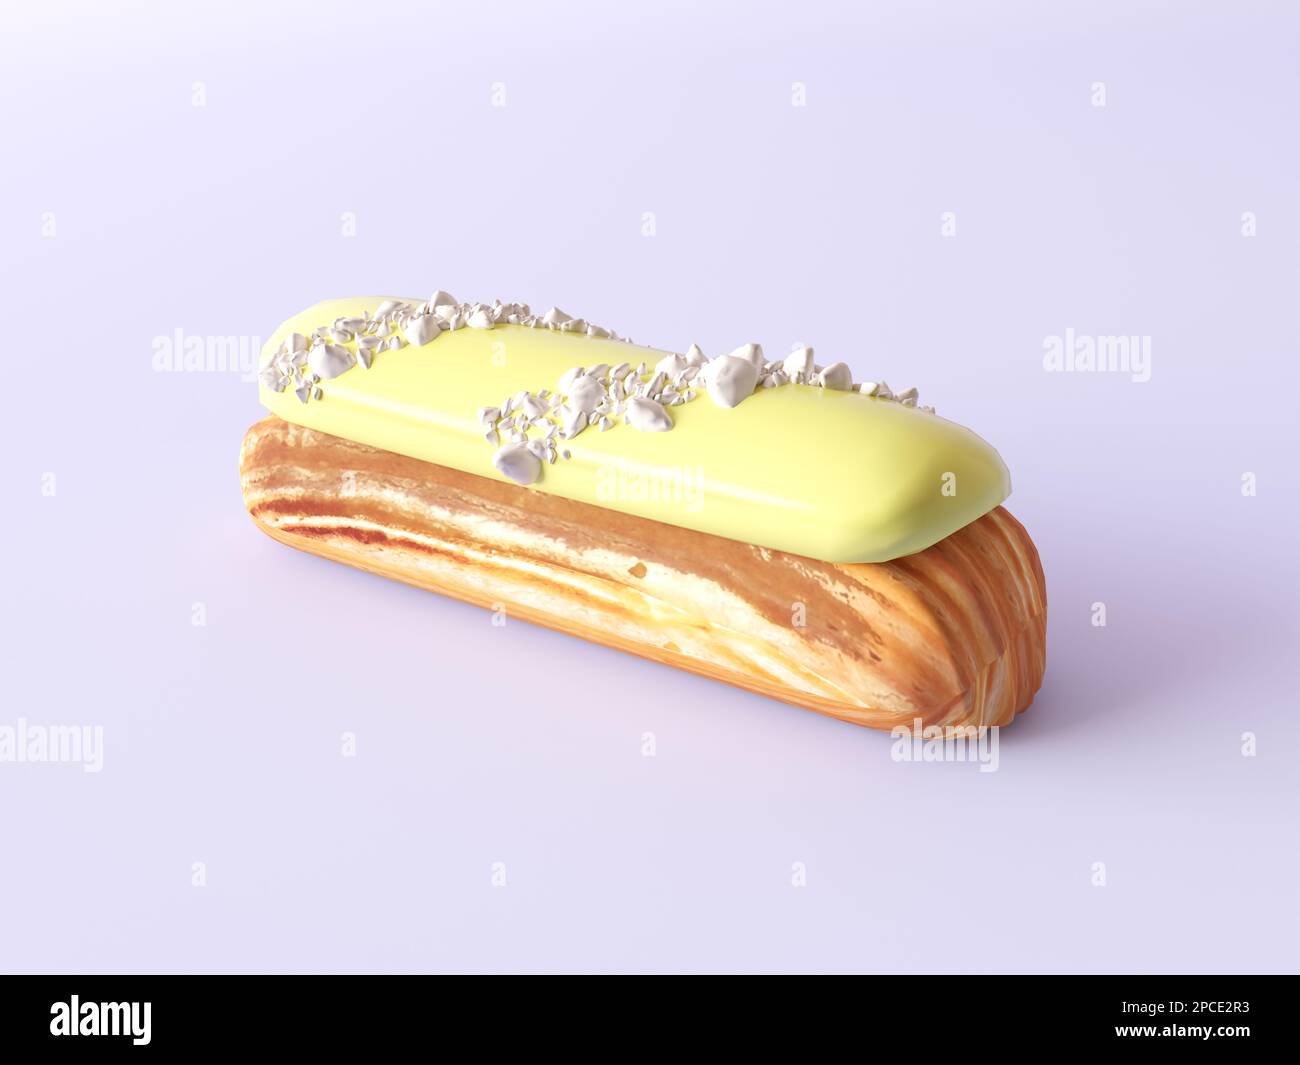 Luxury French eclair with yellow glaze and silver decor. Delicious dessert isolated on a pastel background. Template for a restaurant menu. Stock Photo